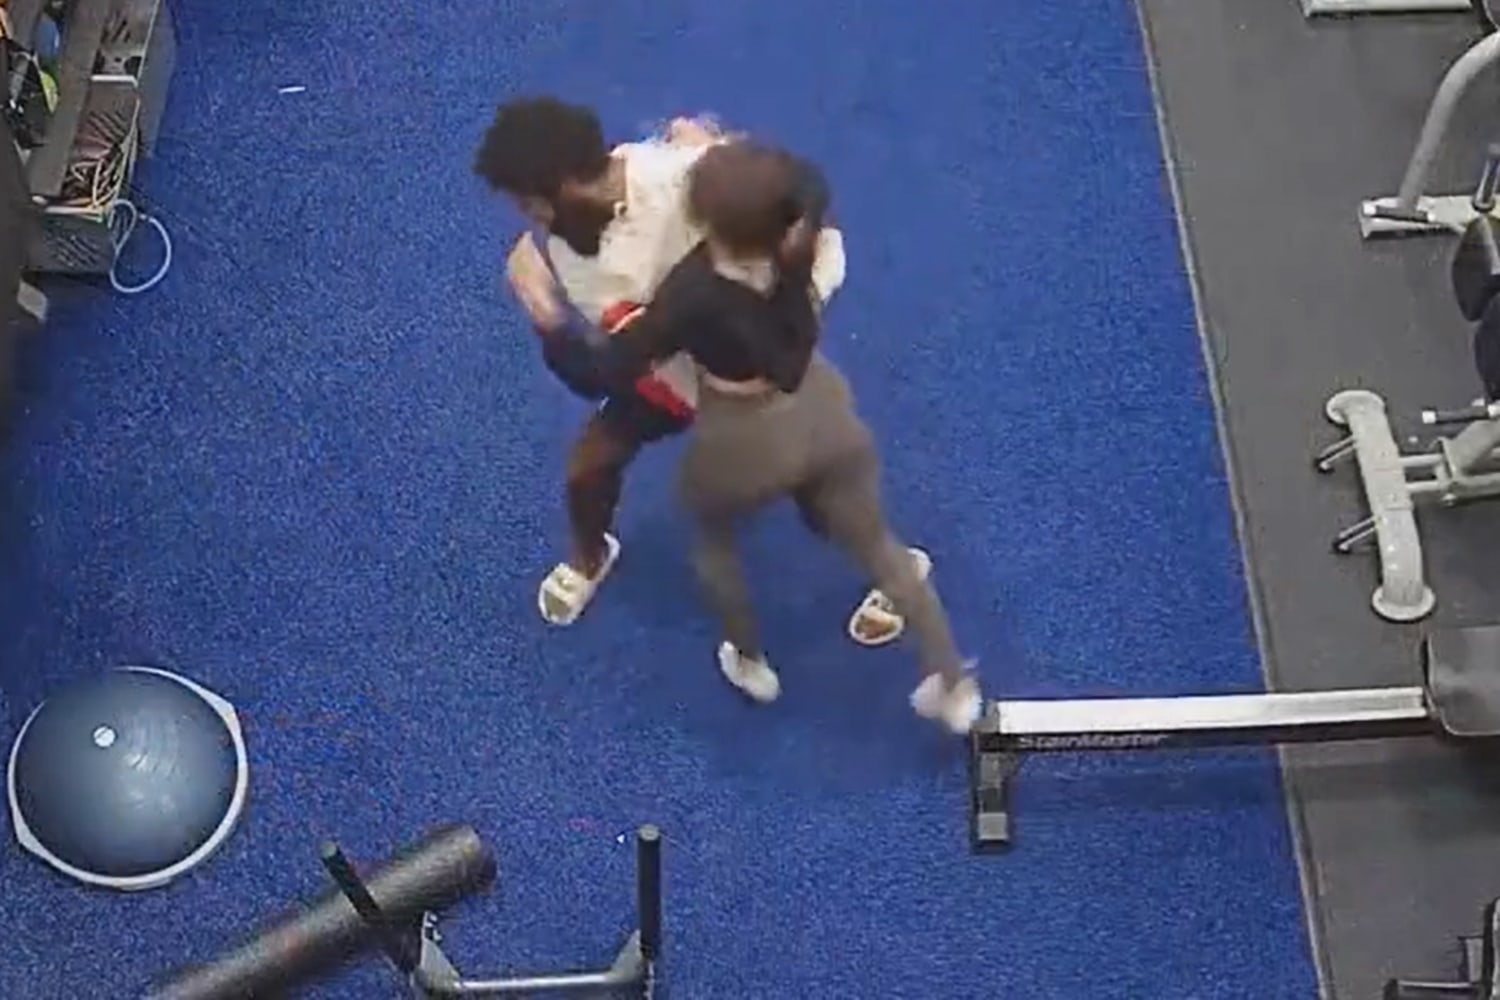 Woman fights off a man at a Florida gym in dramatic video